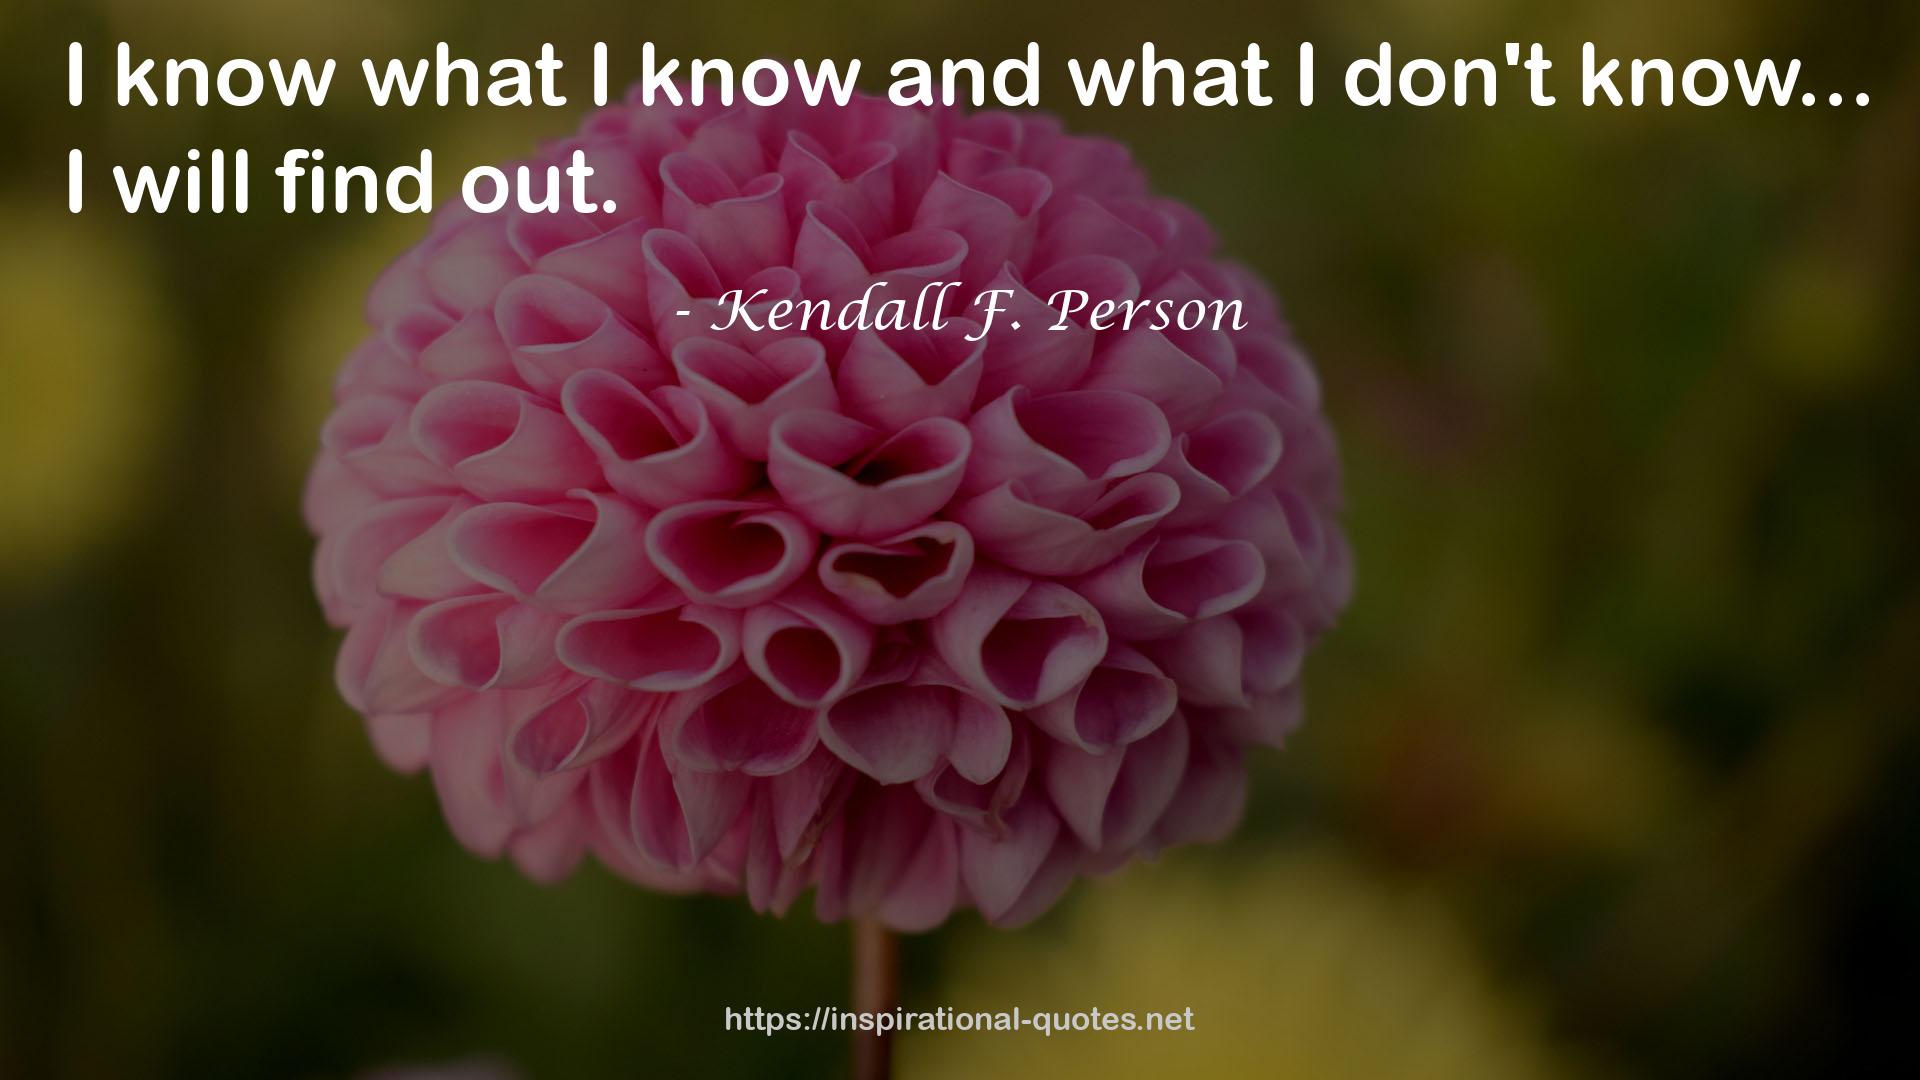 Kendall F. Person QUOTES